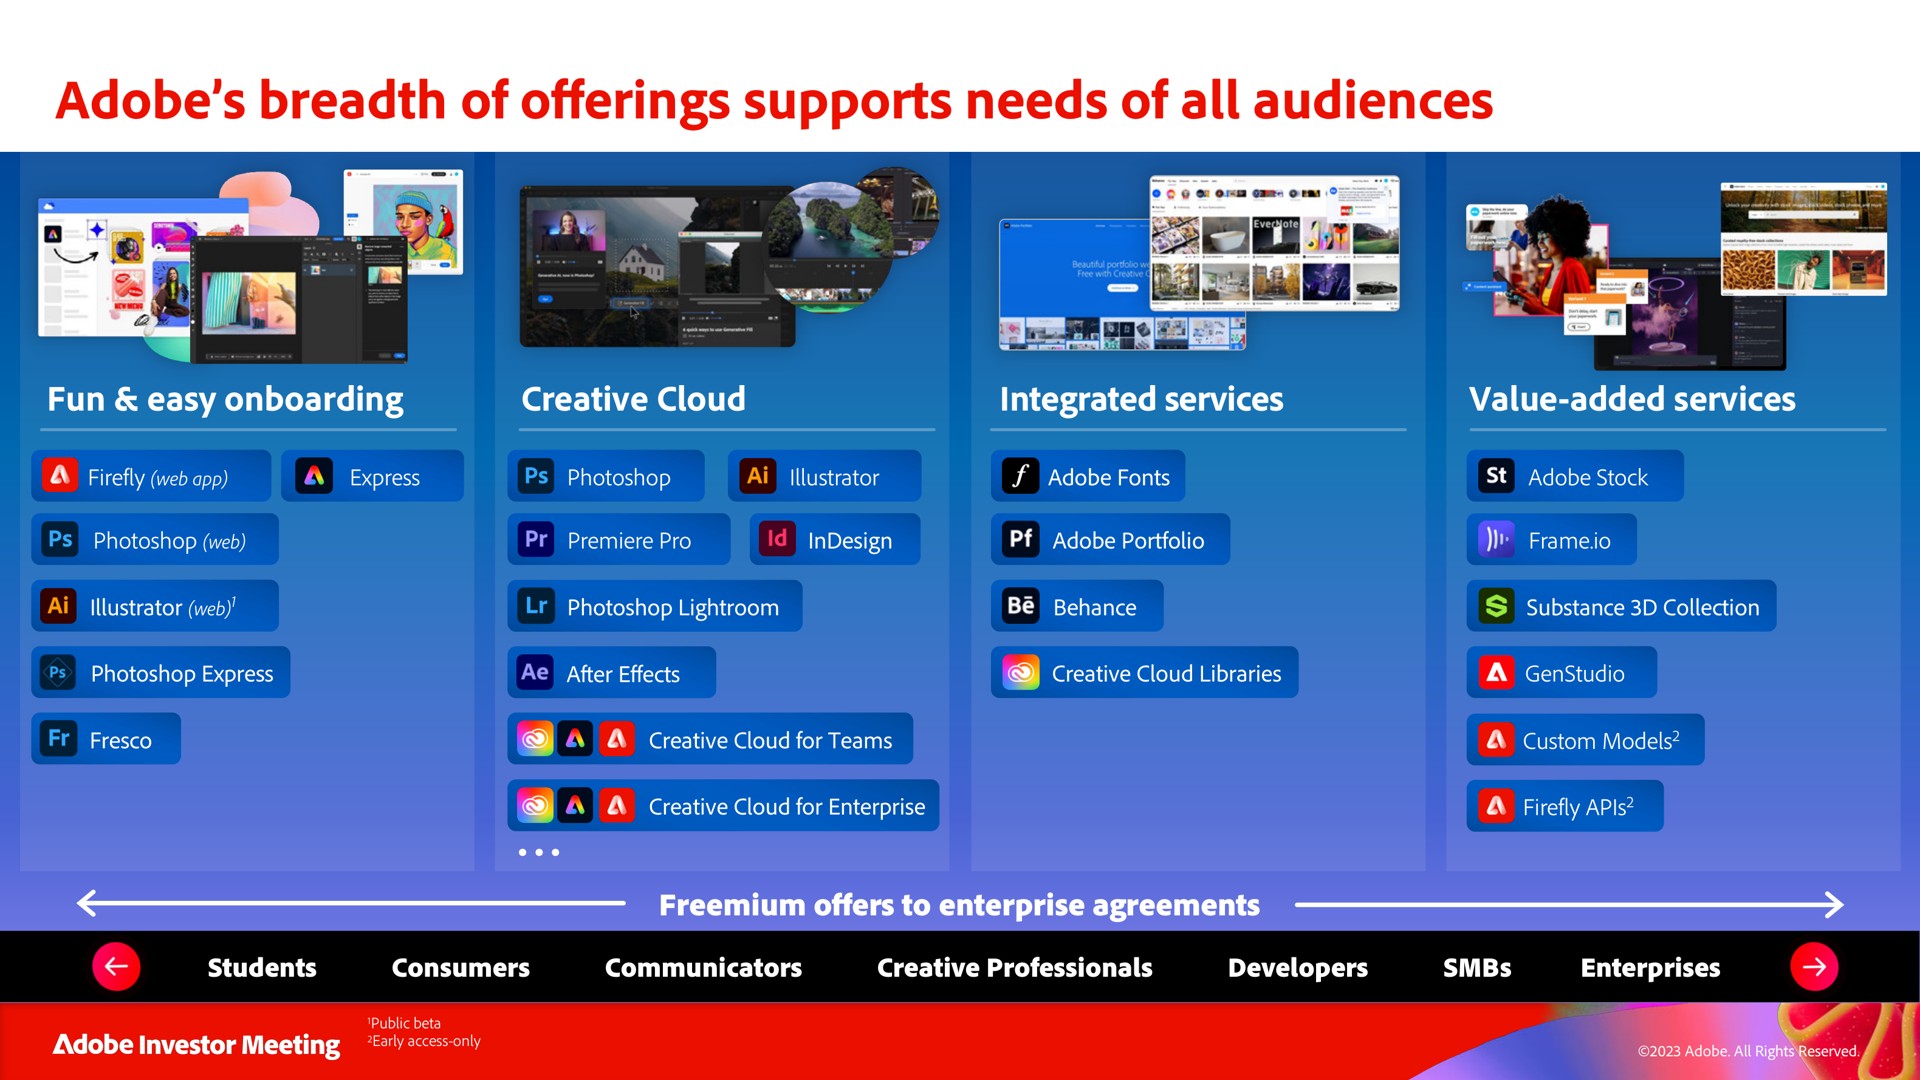 adobe breadth of offerings supports needs of all audiences | Adobe